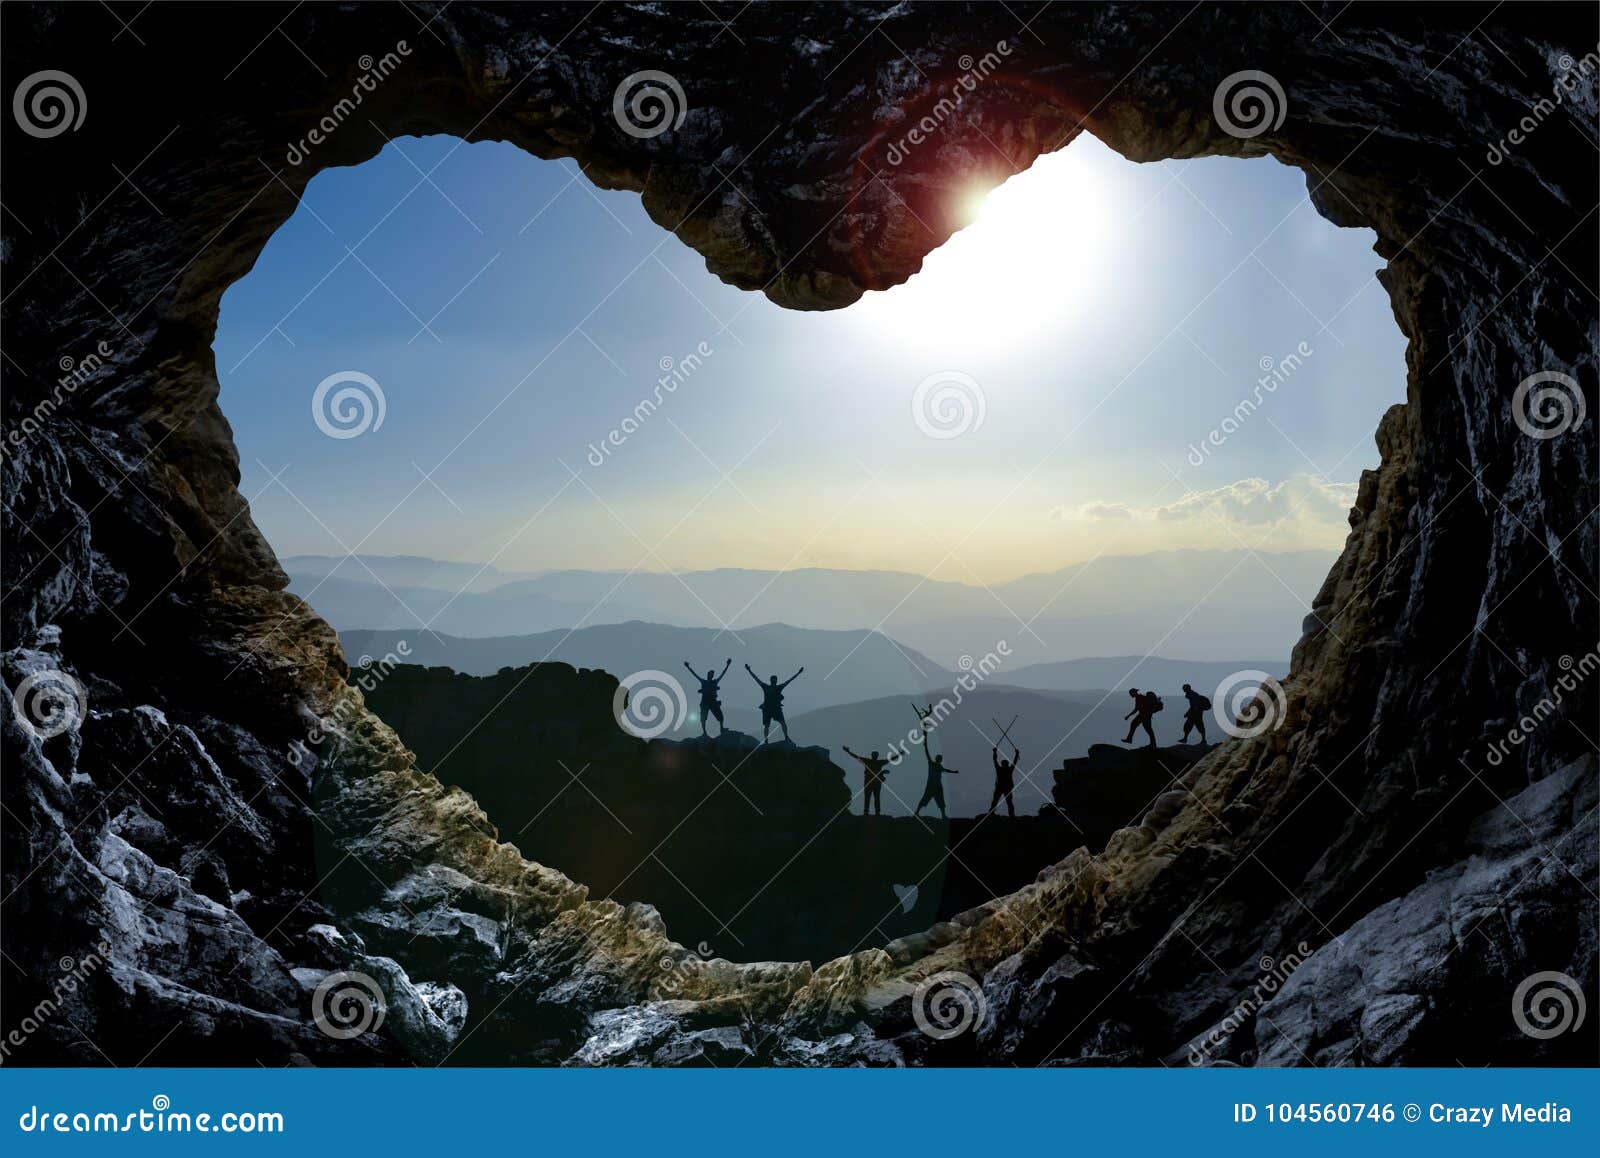 mountaineers through heart d rock formation